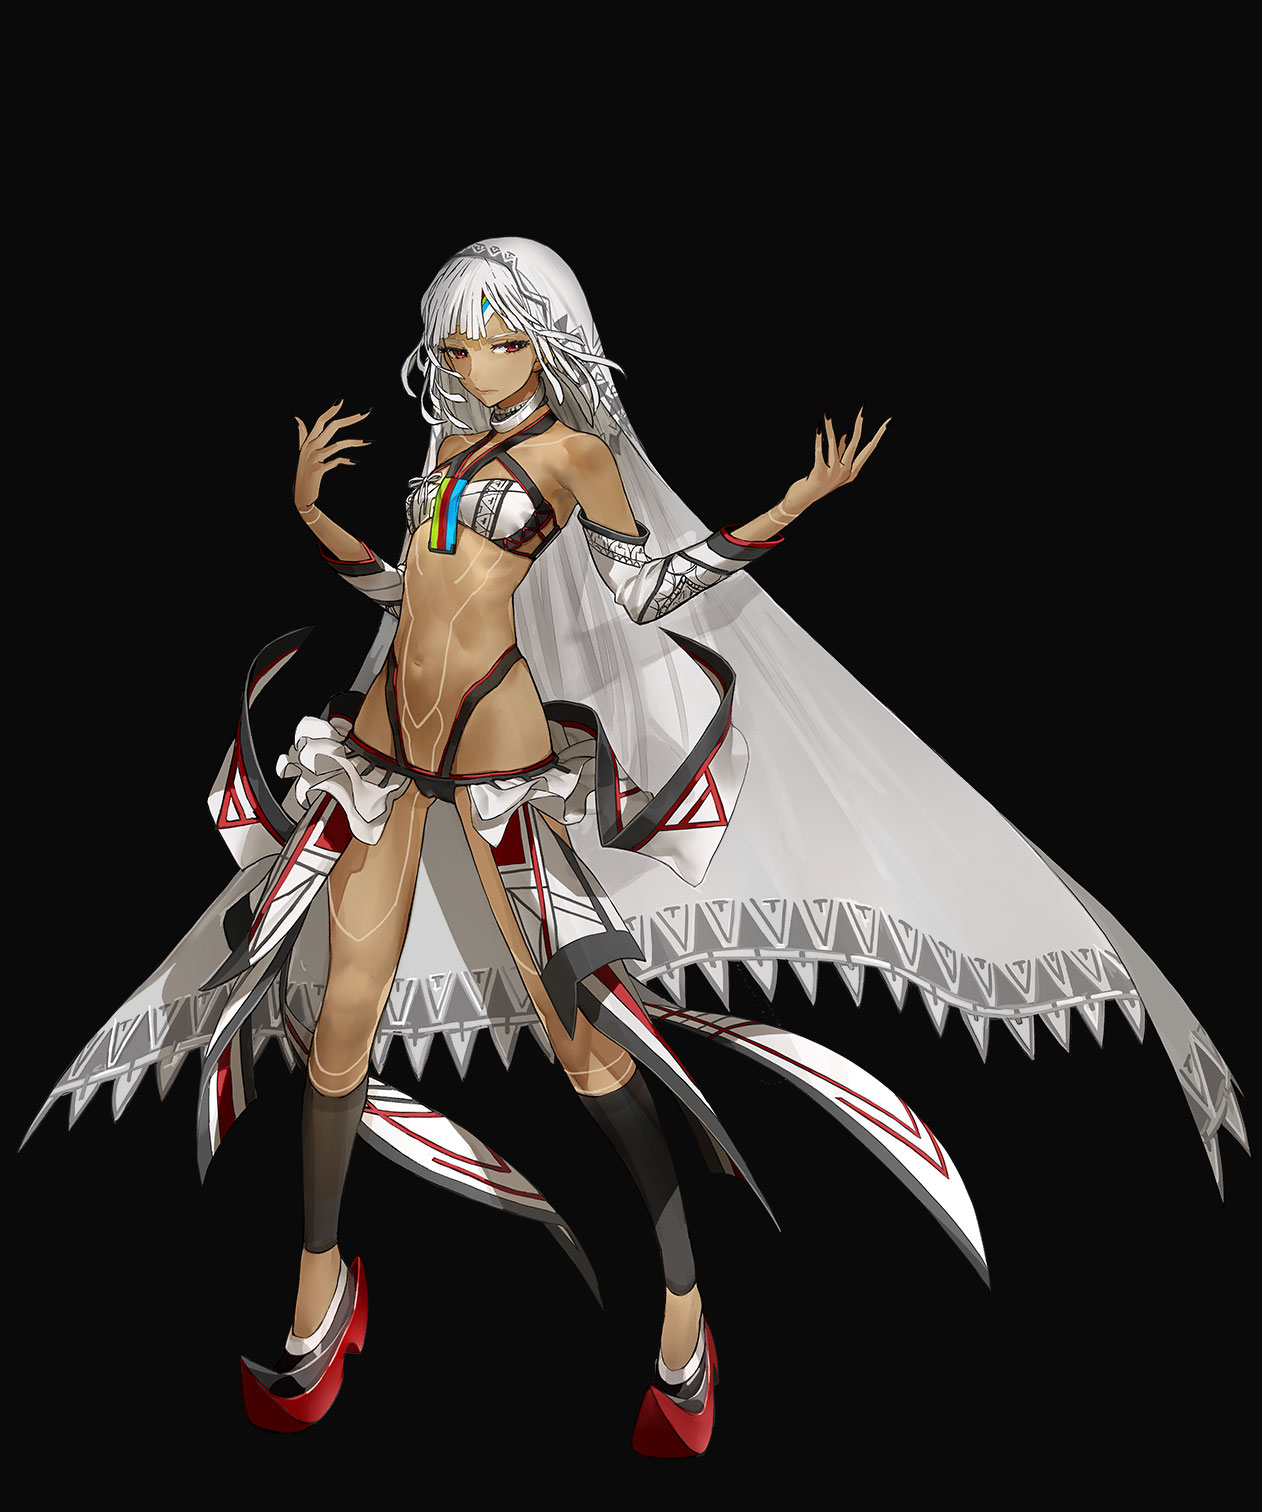 Fate/EXTELLA: The Umbral Star - Altera